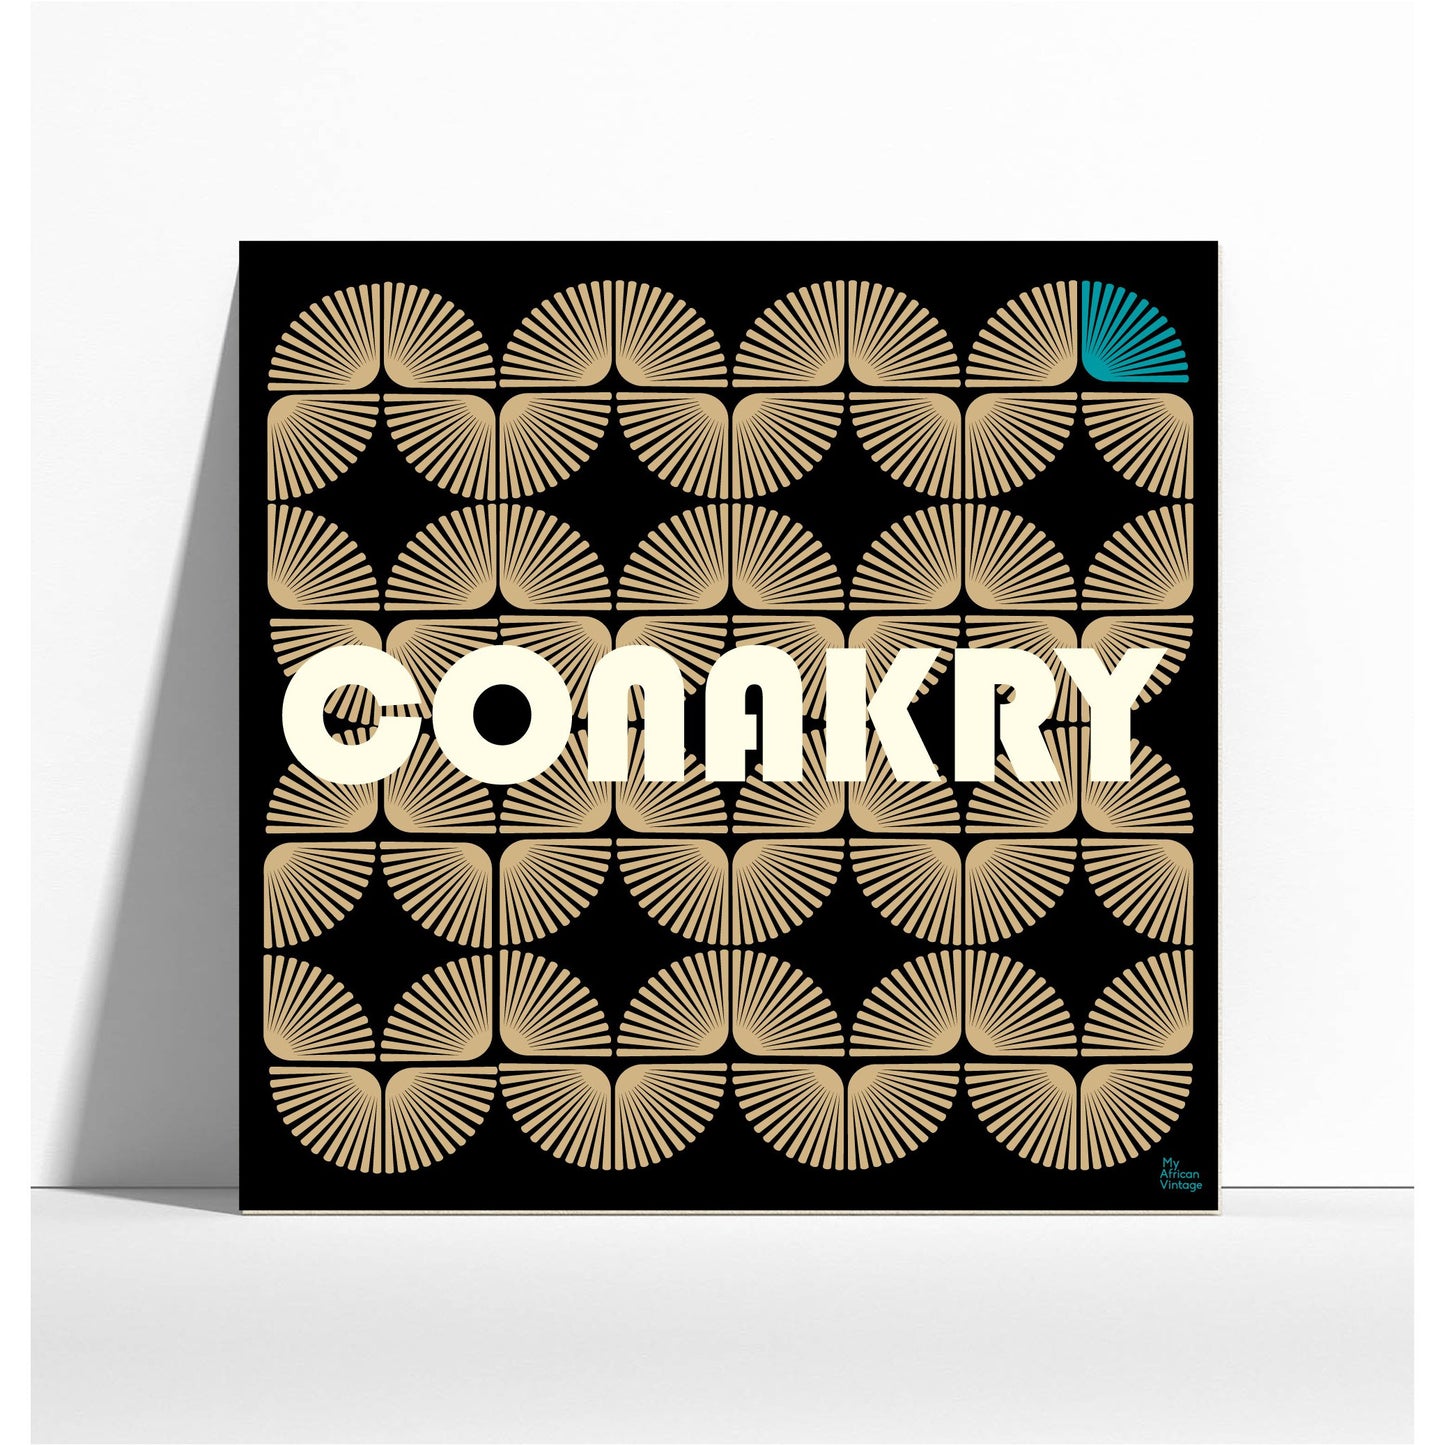 "Conakry" retro style poster -  "My African Vintage" collection